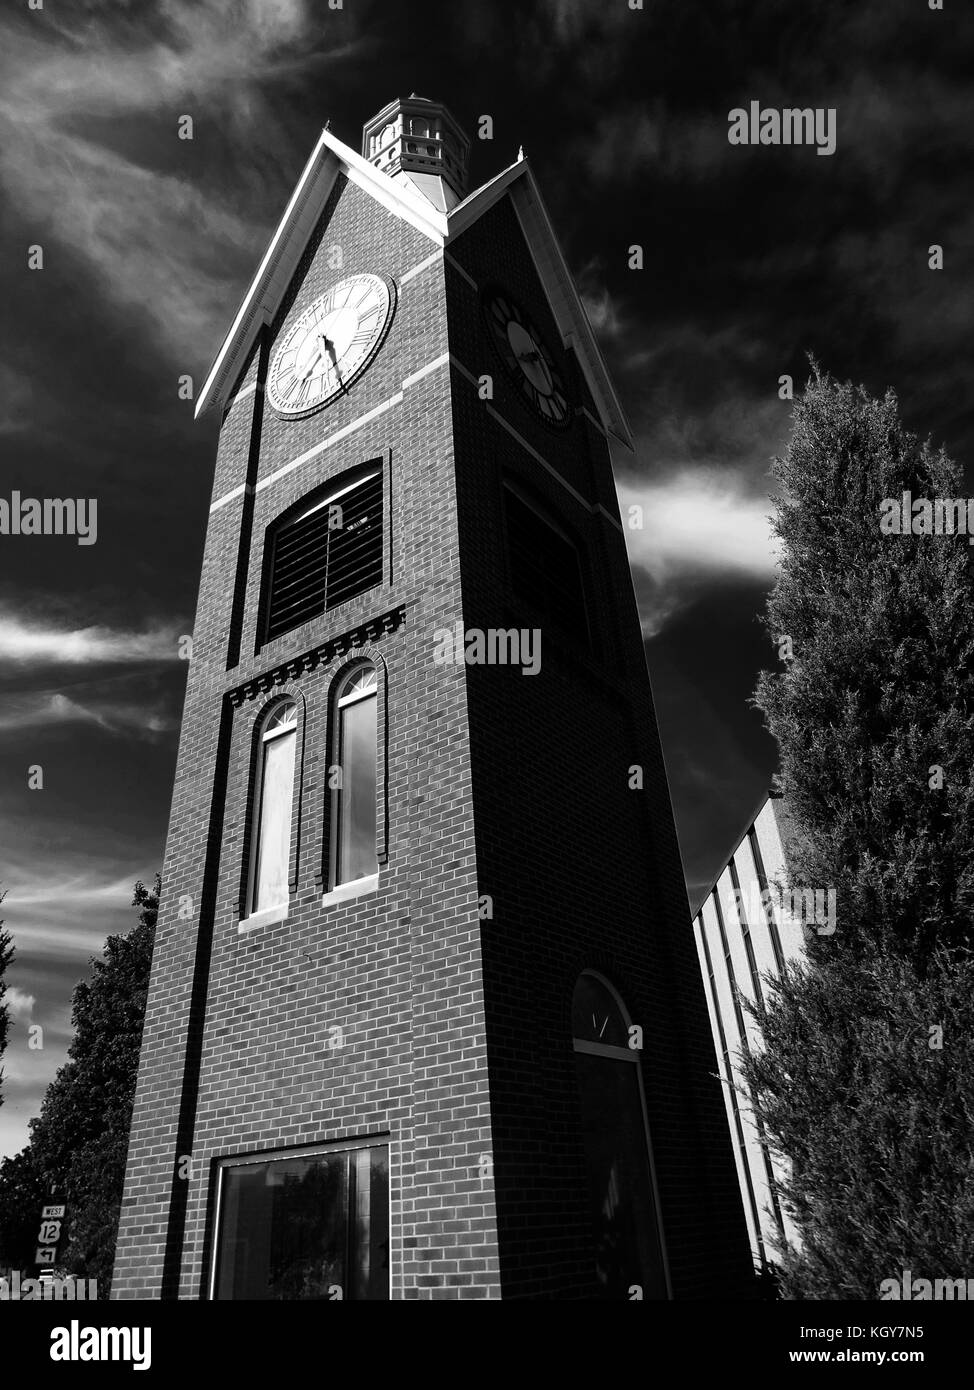 Coldwater, Michigan, United States-July 6, 2017:  A black and white photograph of a clock tower located in the historic town of Coldwater Michigan Stock Photo